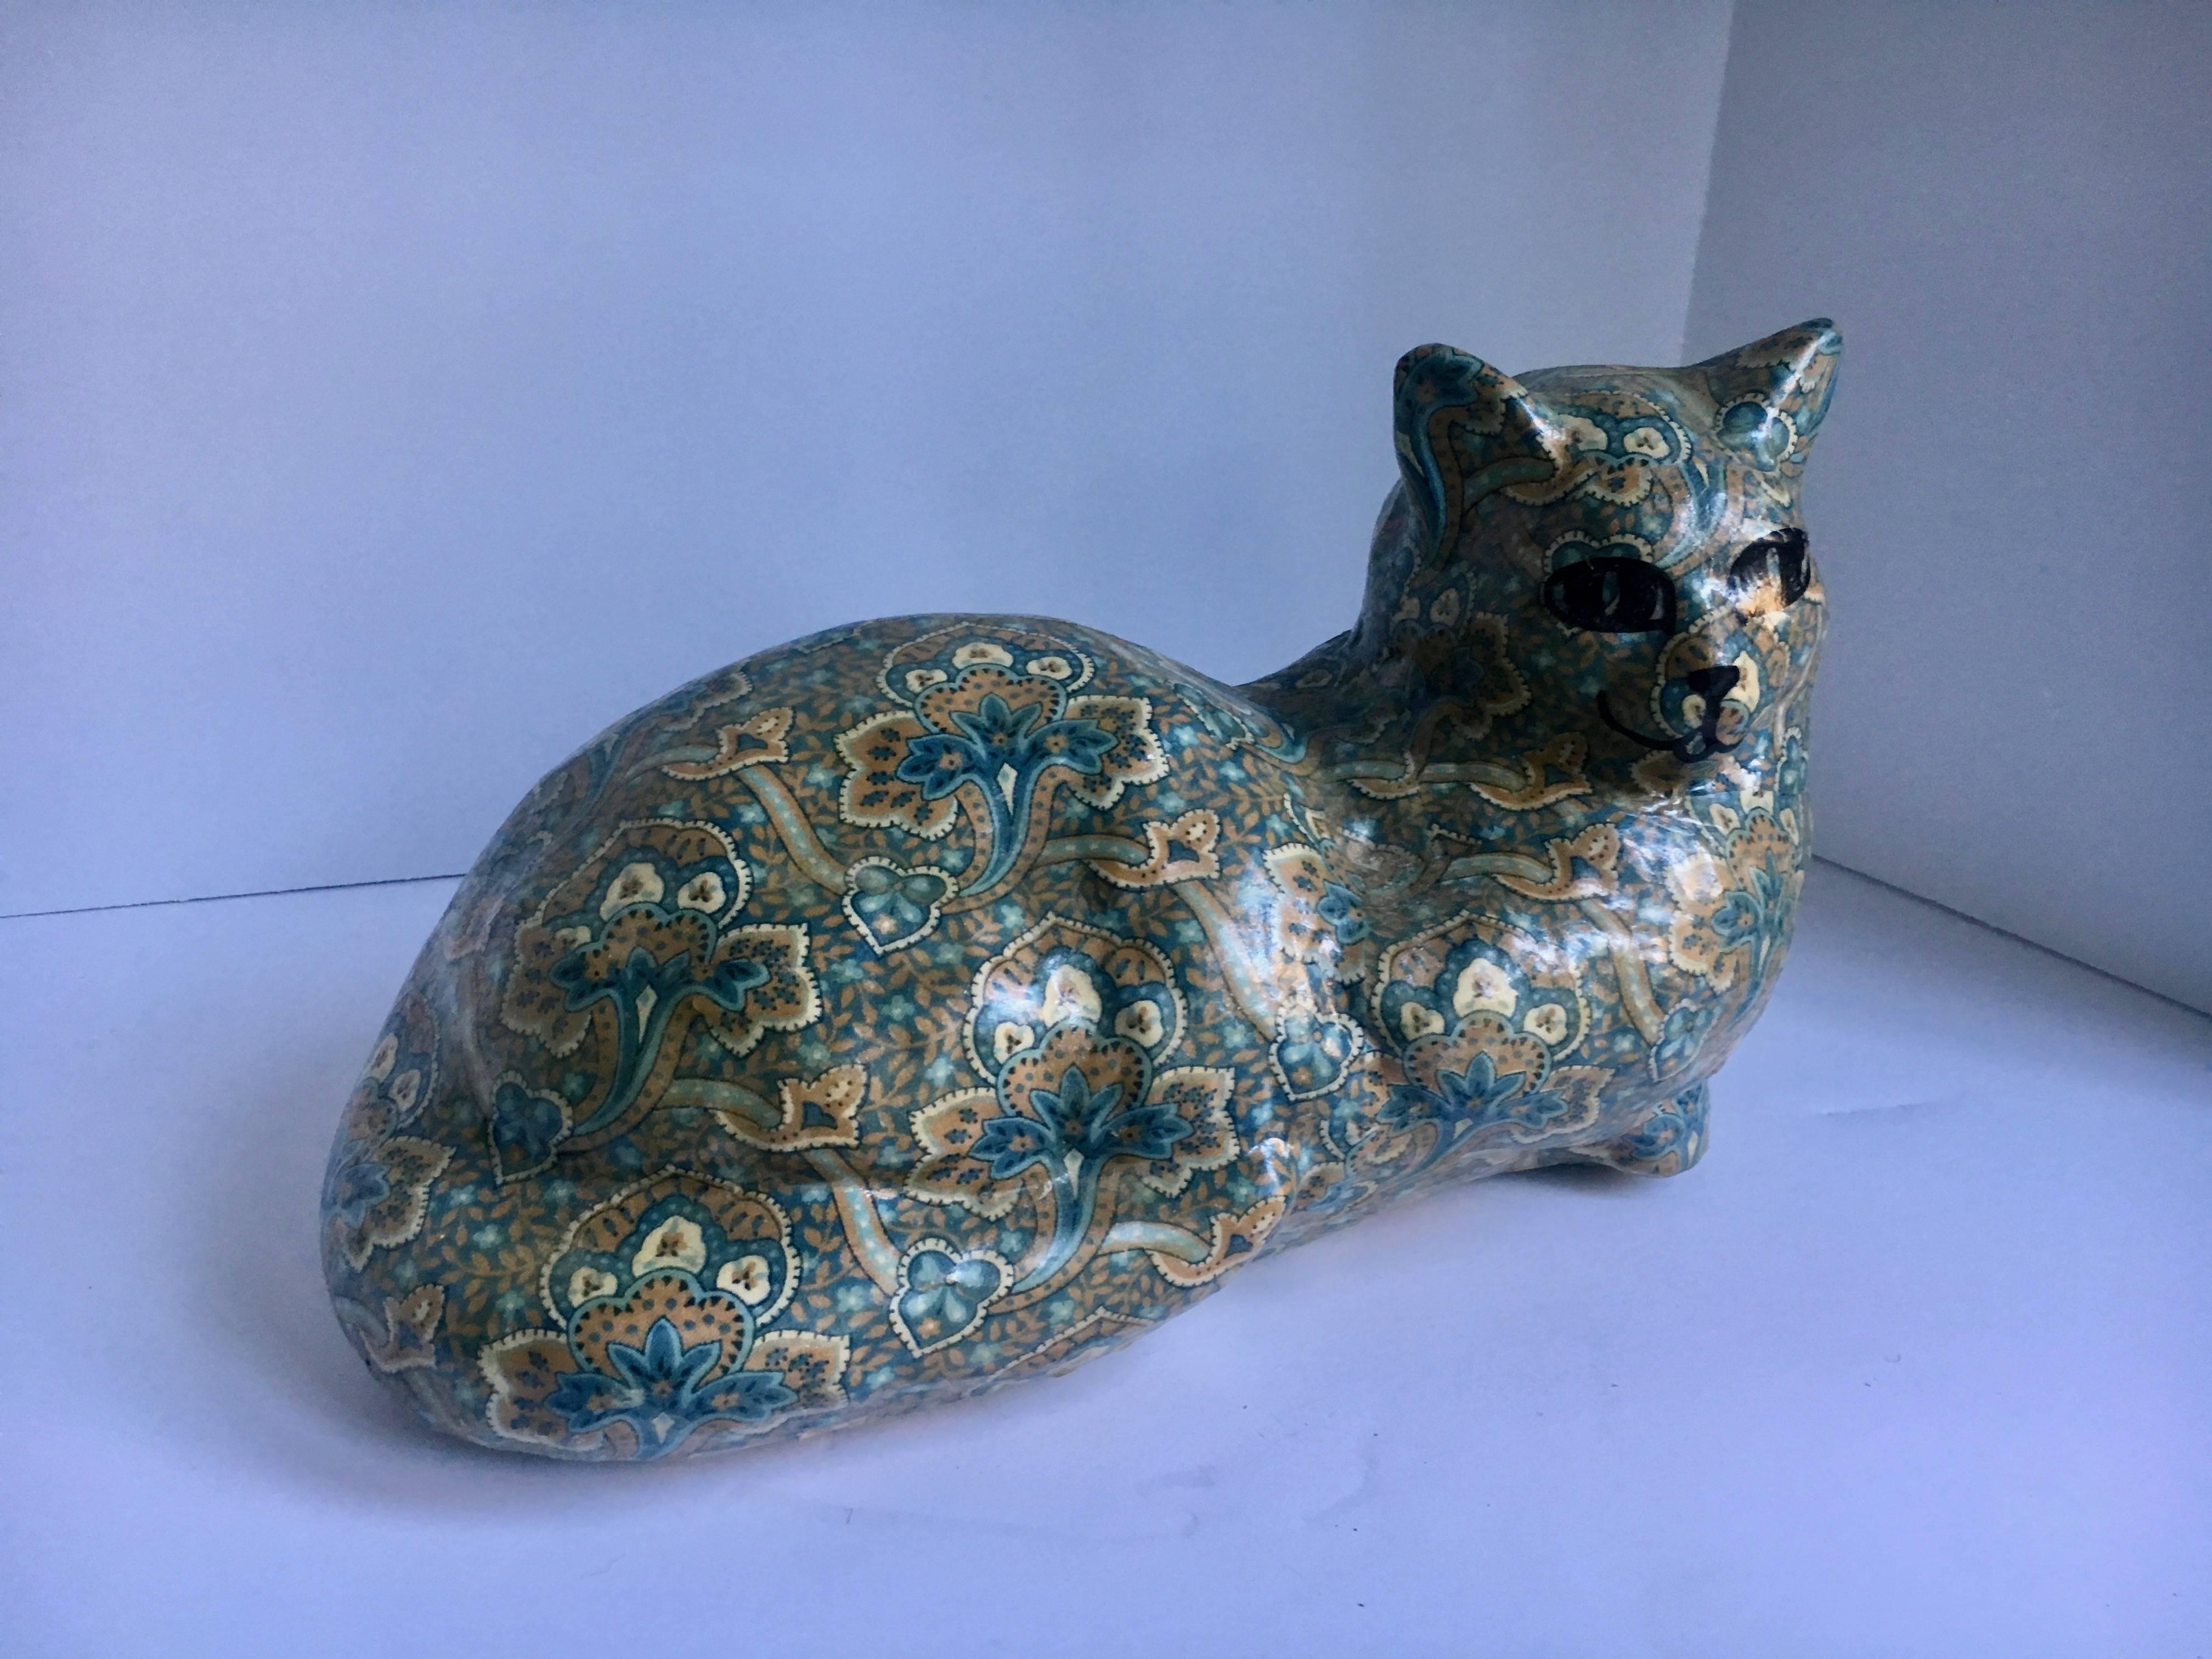 Signed and numbered pottery cat, If you like add-a-bead necklaces, then this kitten is a must-have!

Traditional In nature, however no litter box needed. Place on a shelf, use as a doorstop or talk to it. If it answers you may need more than just